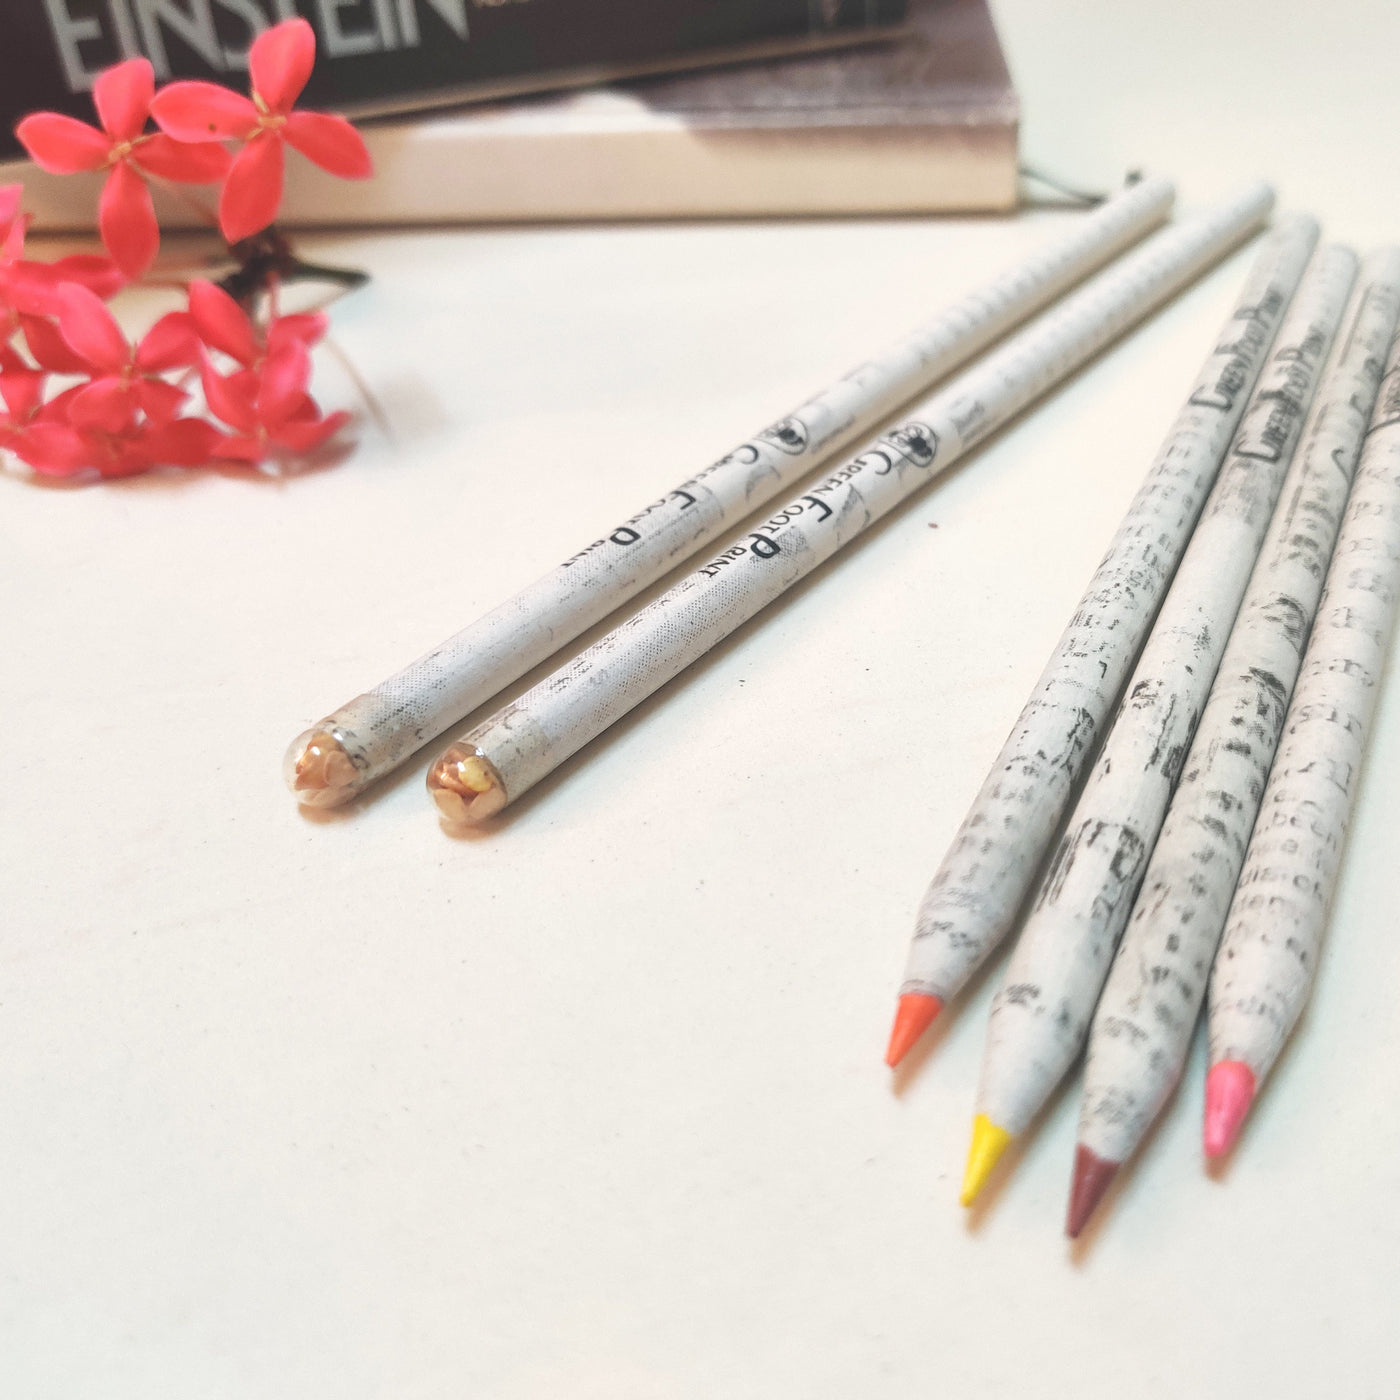 Combo-Recycled News paper Colour pencils and Plantable Seed pencils - Suspire